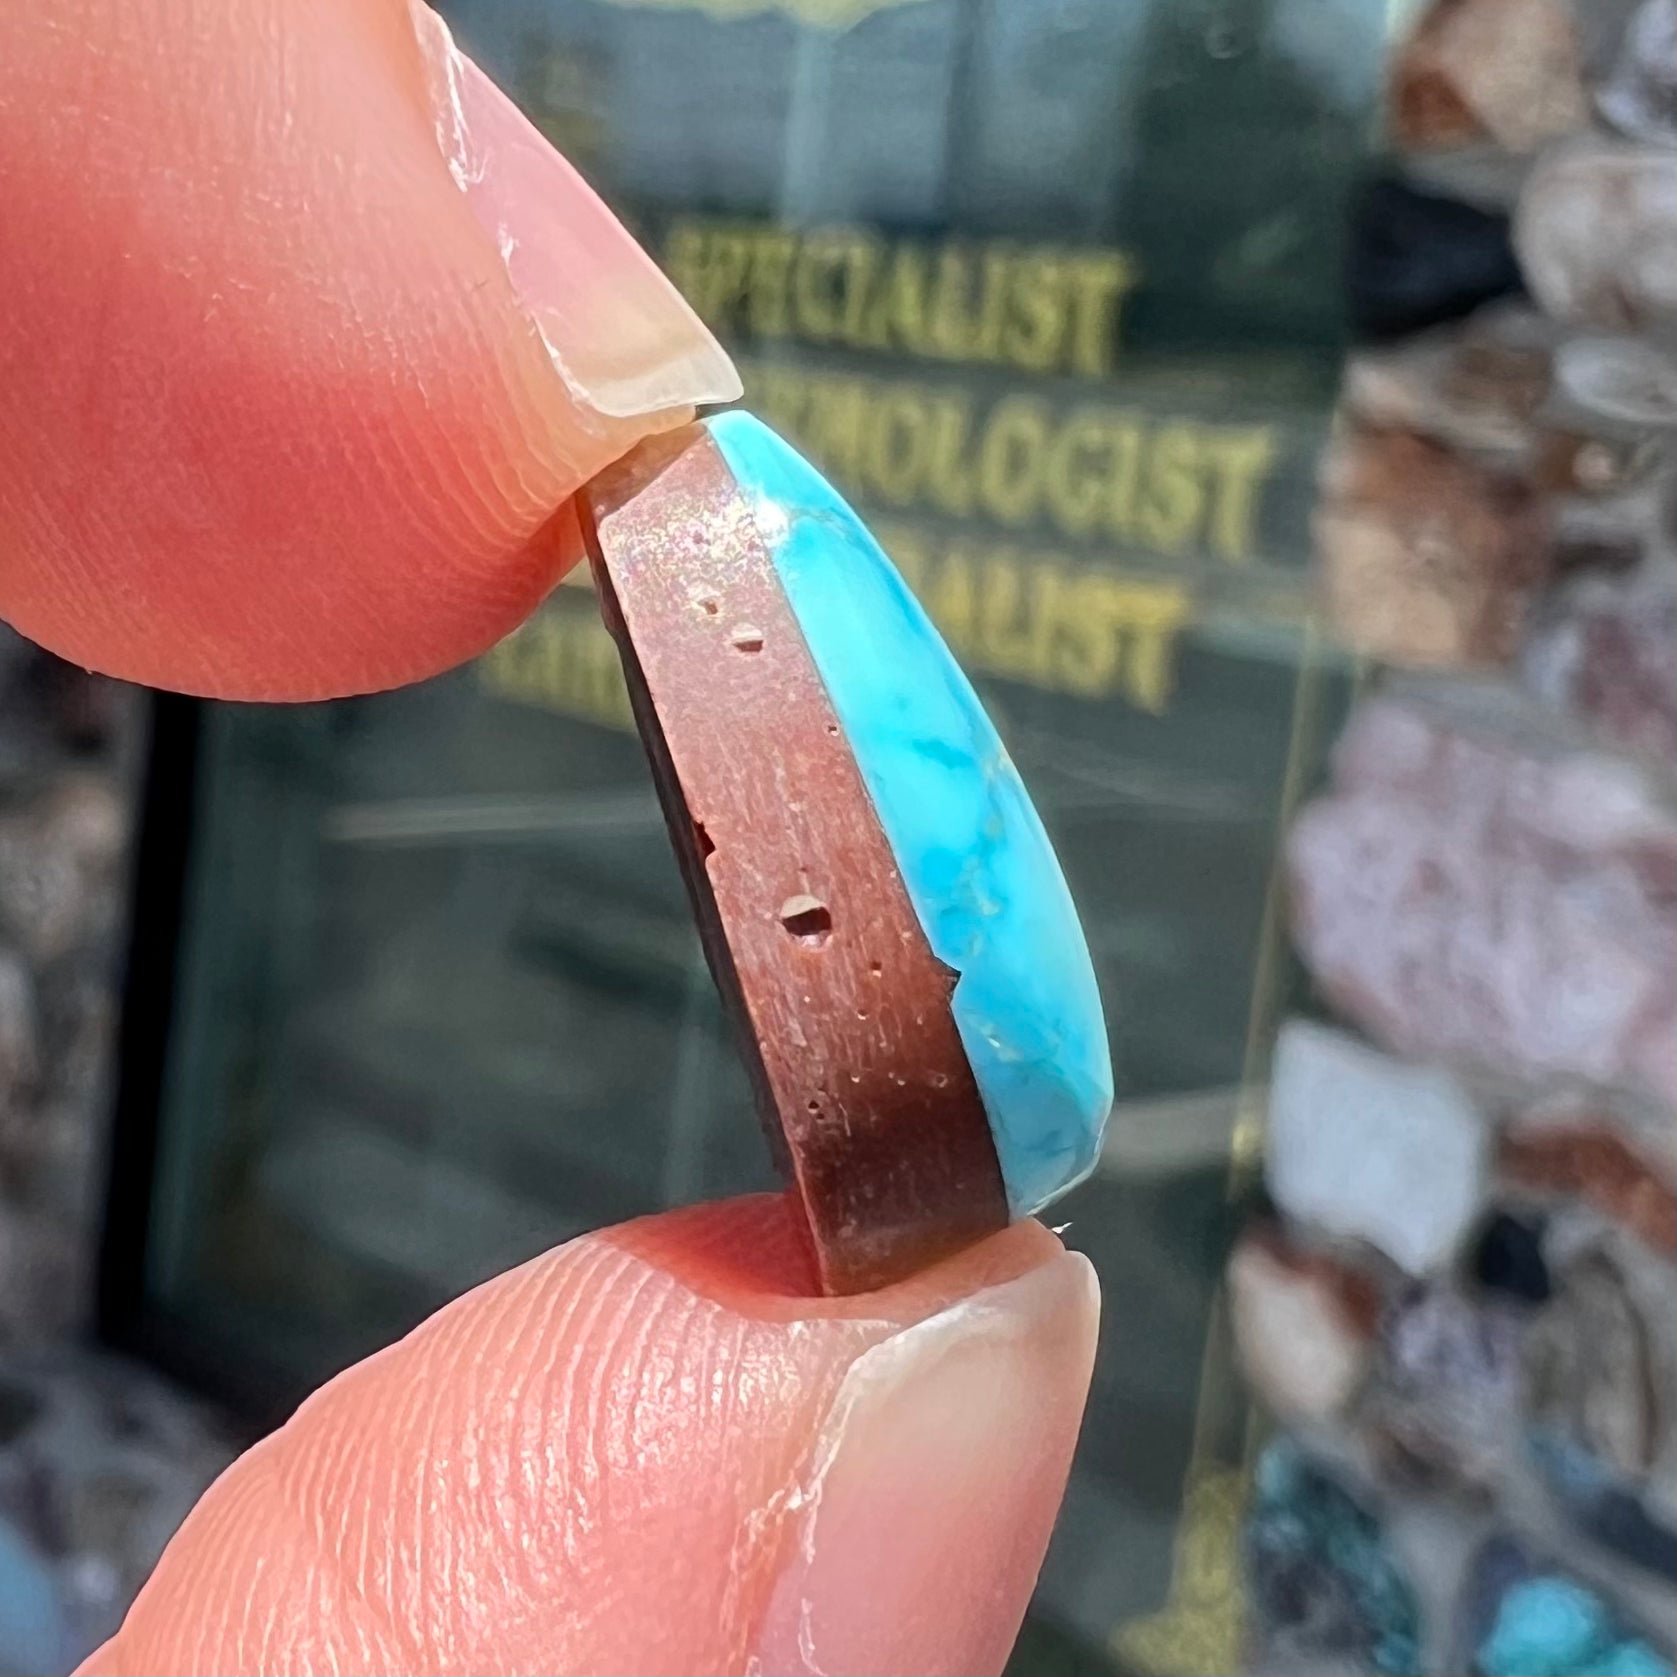 A loose, drop shaped, cabochon cut Sleeping Beauty turquoise stone.